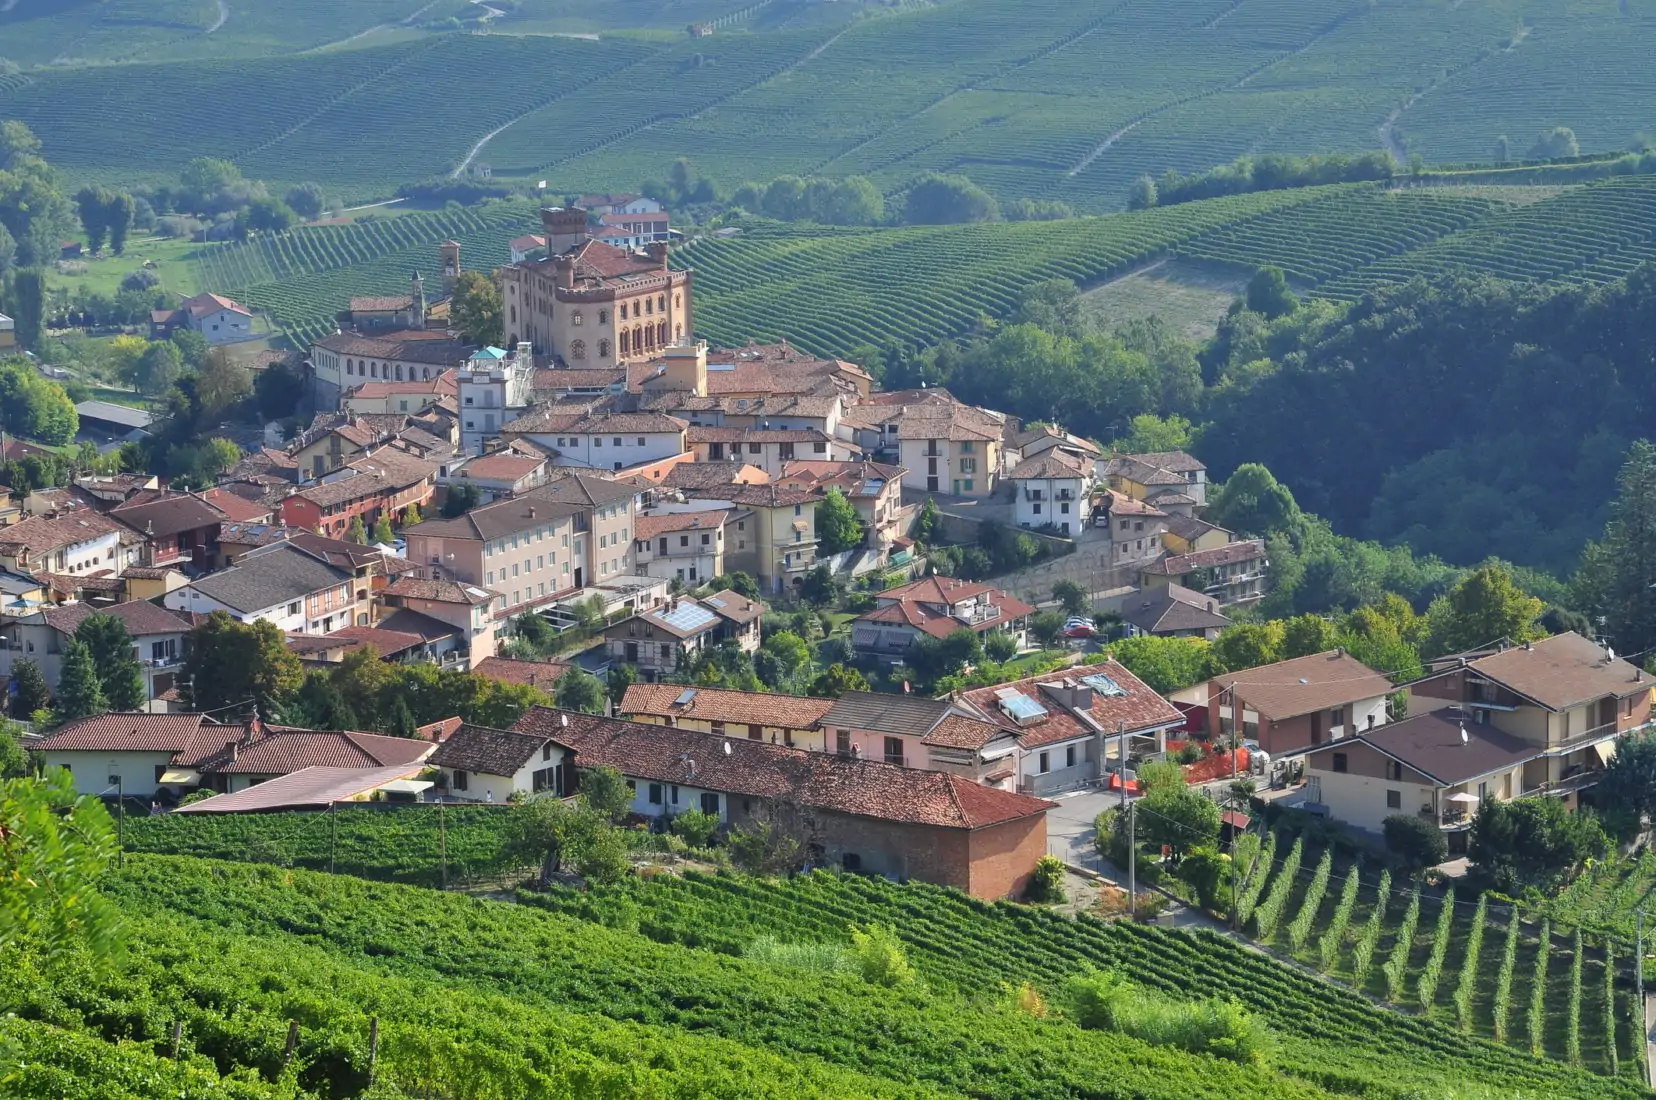 Langhe, the main Piedmont wine producing area. Barolo village. Unesco world heritage site. Vineyards on the South Piemonte hills, Italy. Italian green landscape